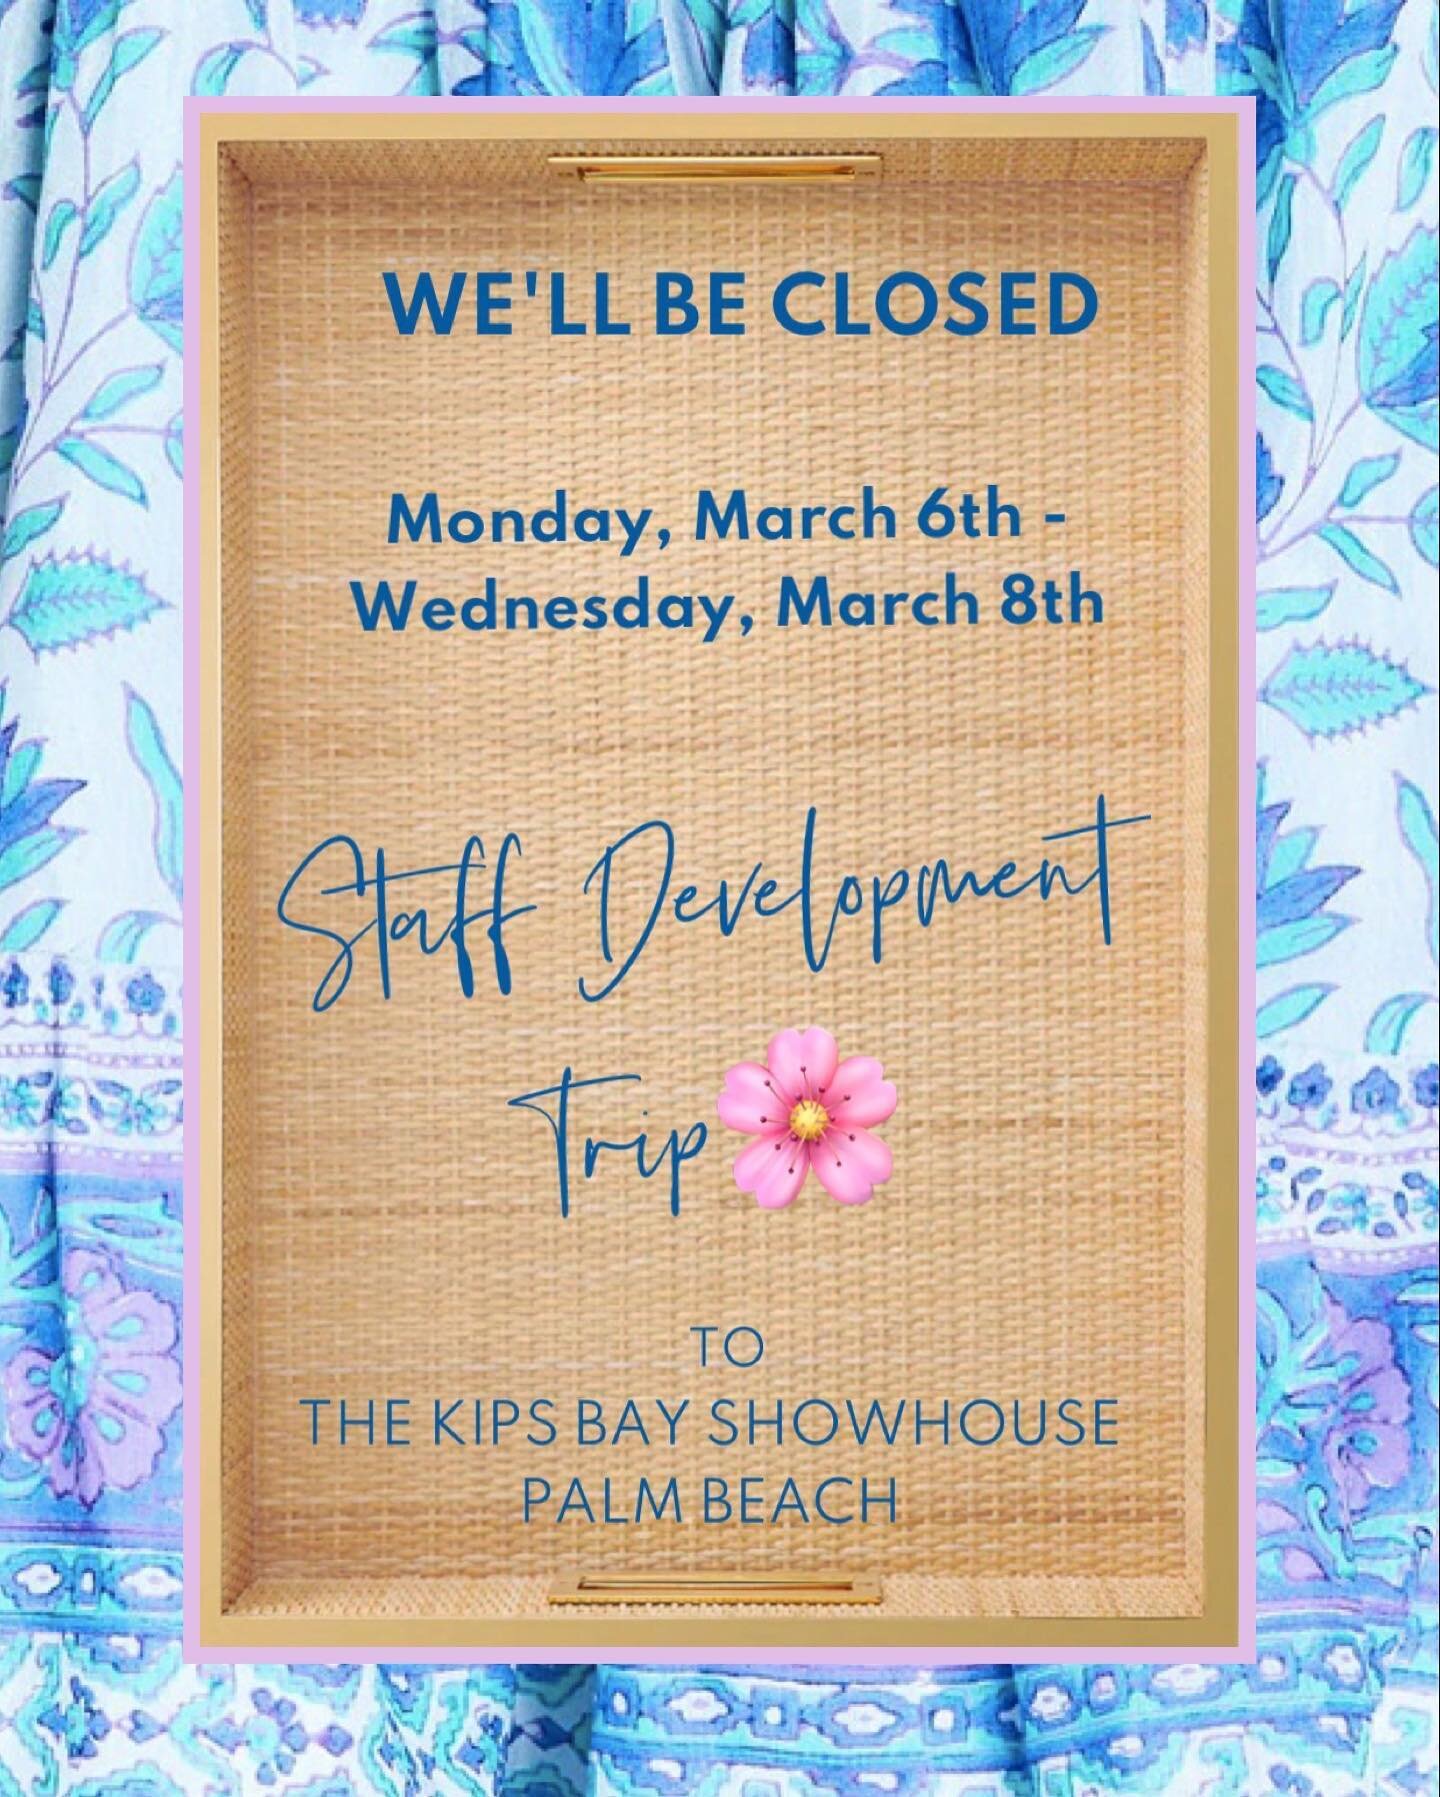 #AHOMESoaksUpPB🌸😎 

We CANNOT WAIT to show you what we&rsquo;ll be up to! 🐚🌸 🏡🌴 😉

WEB ORDERS PLACED ON OR AFTER SATURDAY, MARCH 4th WILL SHIP ON THURSDAY, MARCH 9th when we re-open. 

Thx for your patience.
xo,
A
.
.
.
.
.
.
#finehomefurnishi